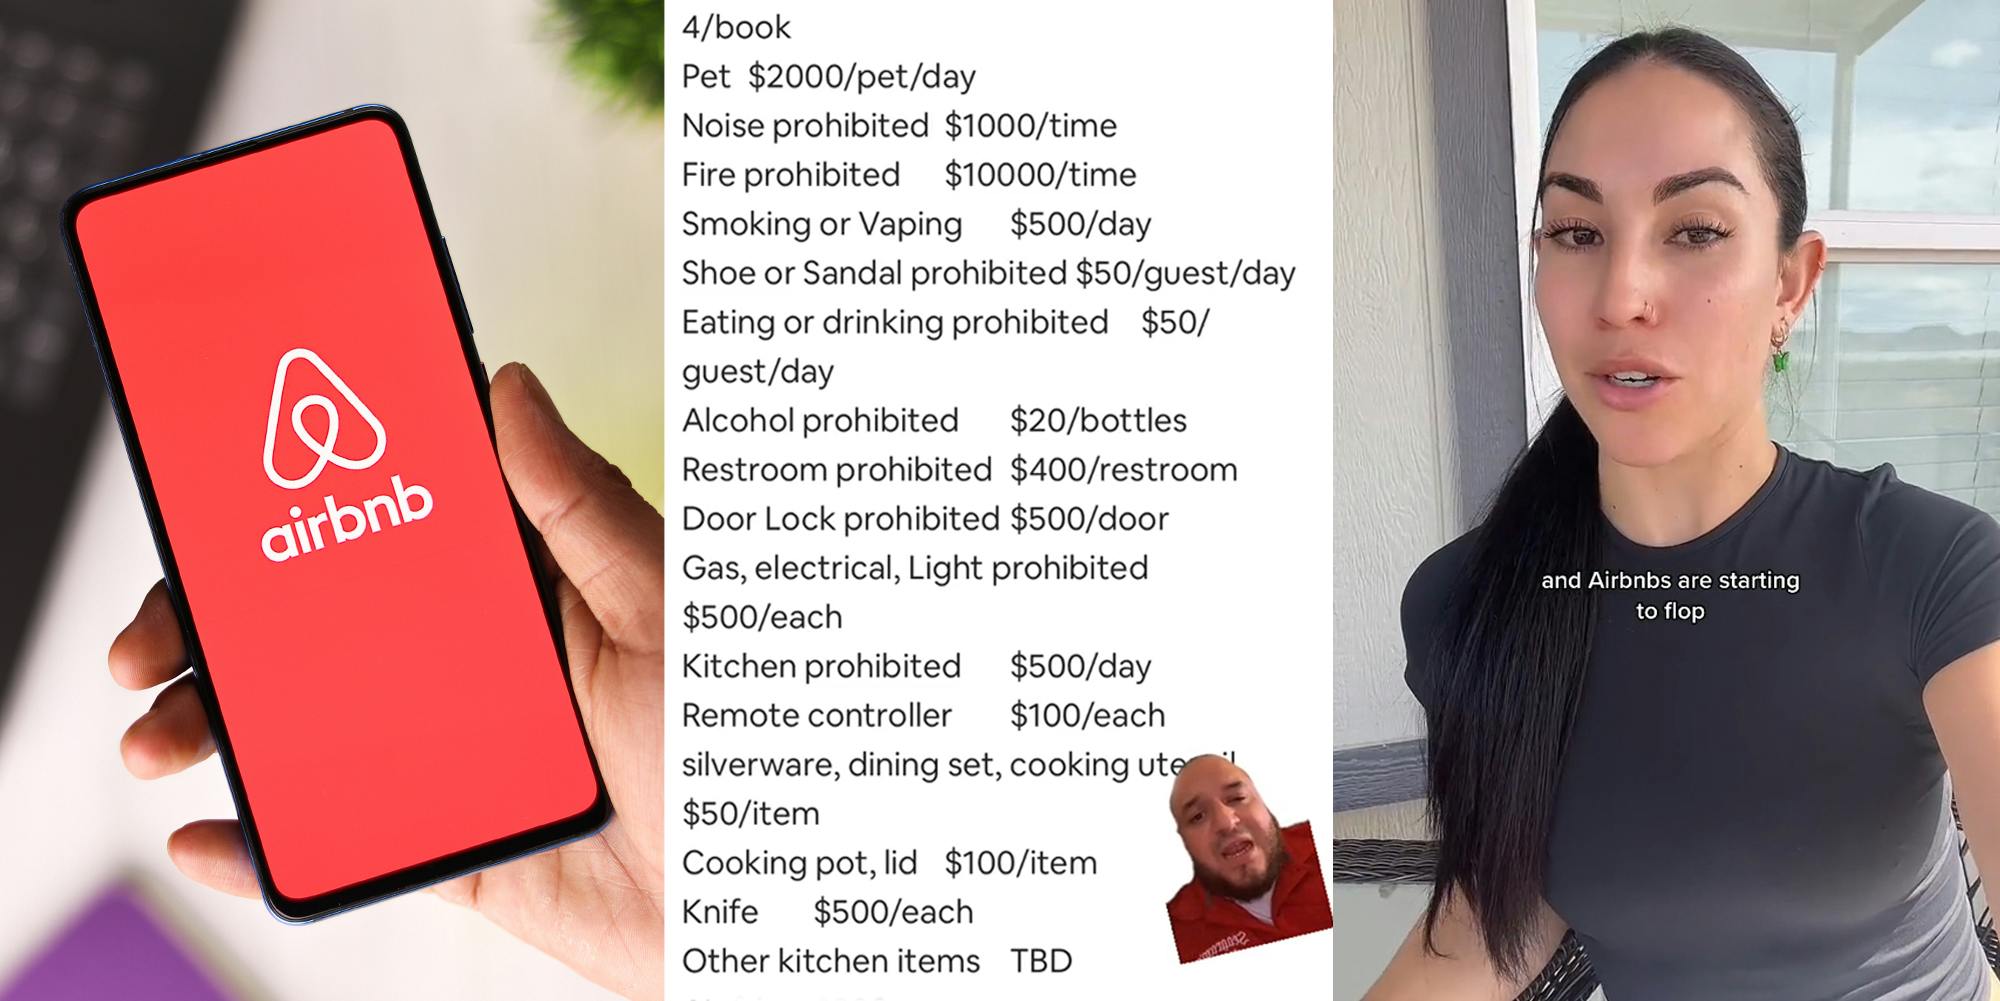 hand holding phone with Airbnb on screen in front of blurred desk background (l) man greenscreen TikTok over Airbnb rules (c) woman speaking with caption "and Airbnbs are starting to flop" (r)